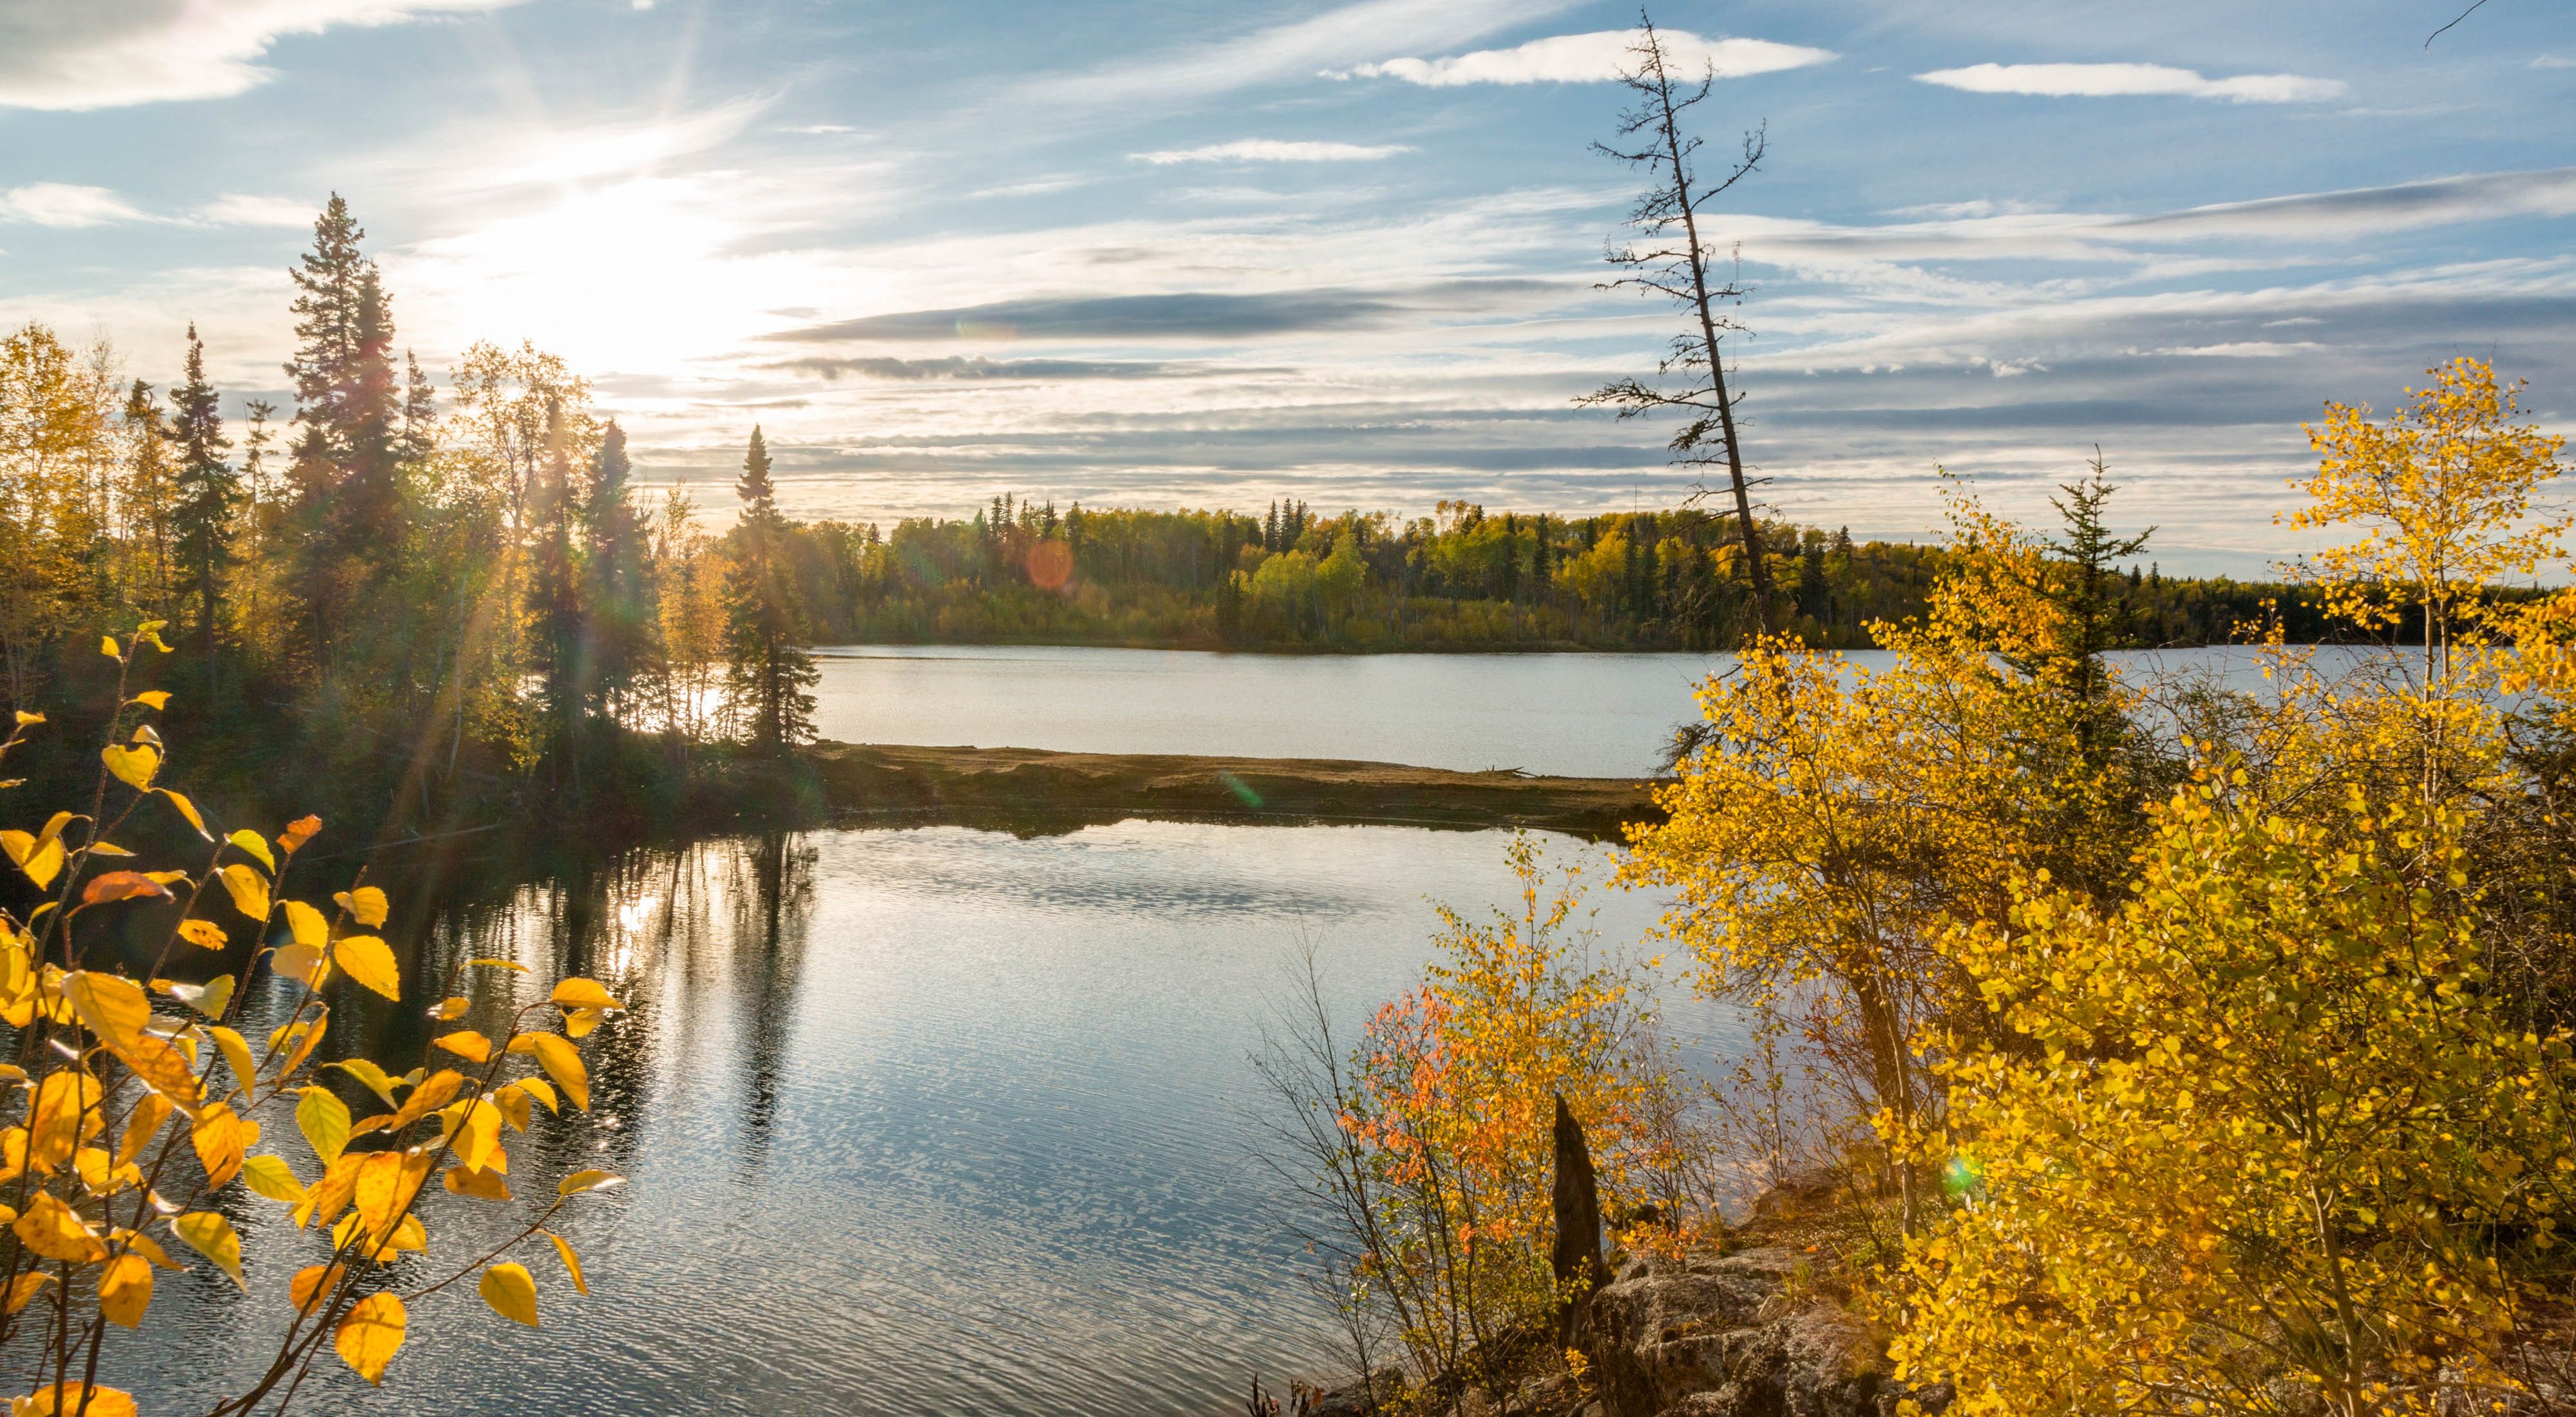 View looking out over a large body of water with autumn-colored forests along its banks at sunrise.